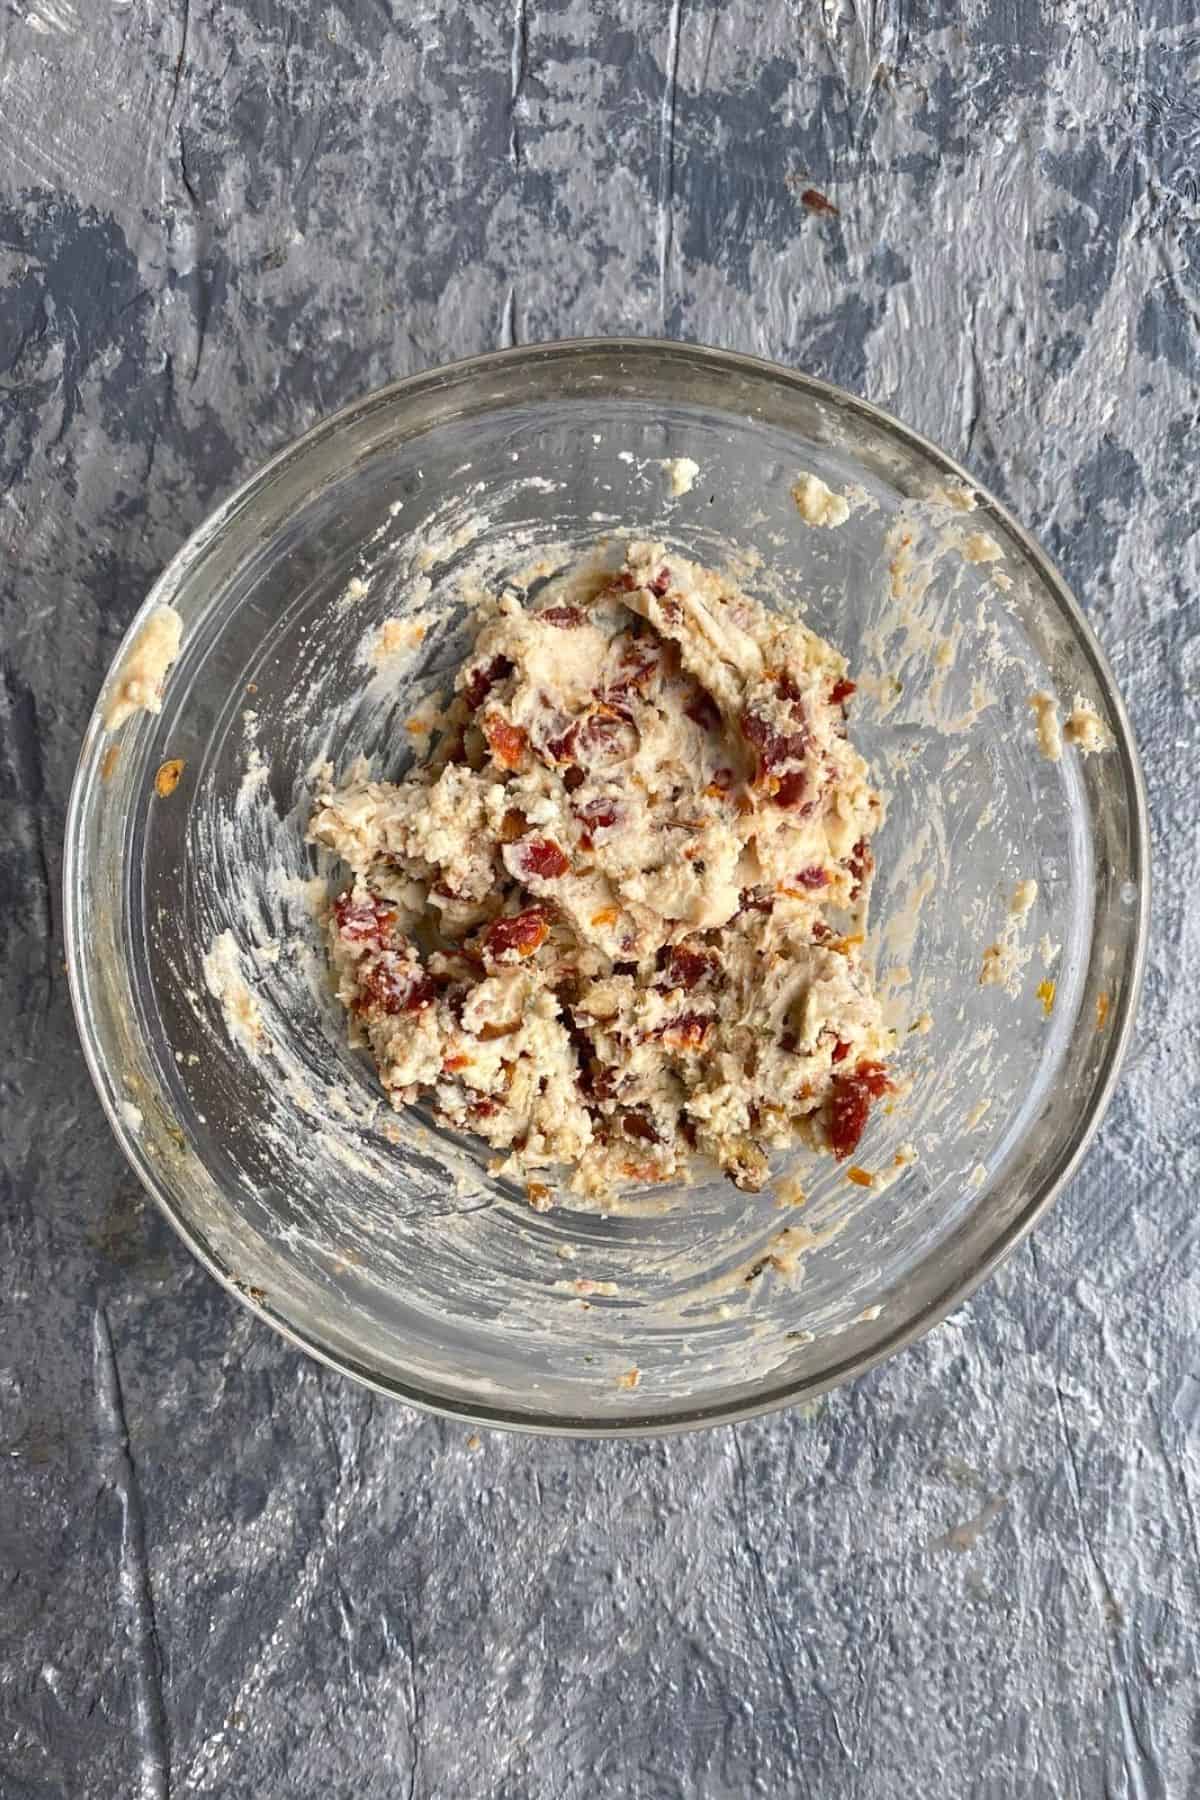 A mixture of garlic cheese, sun dried tomatoes and walnuts in a mixing bowl